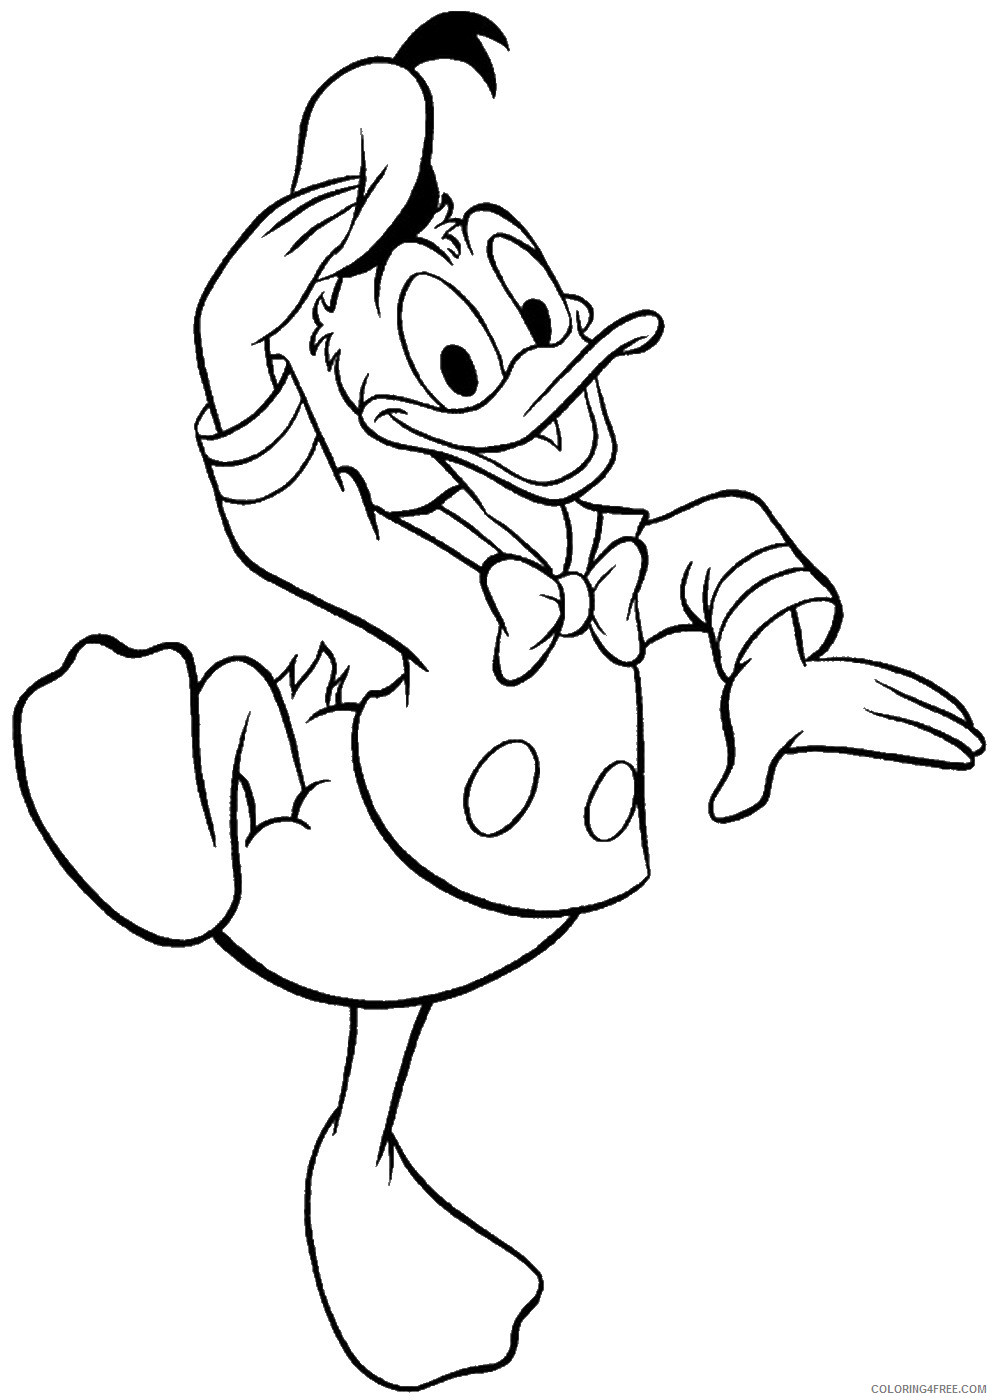 Donald Duck Coloring Pages Cartoons donald_15 Printable 2020 2515 Coloring4free